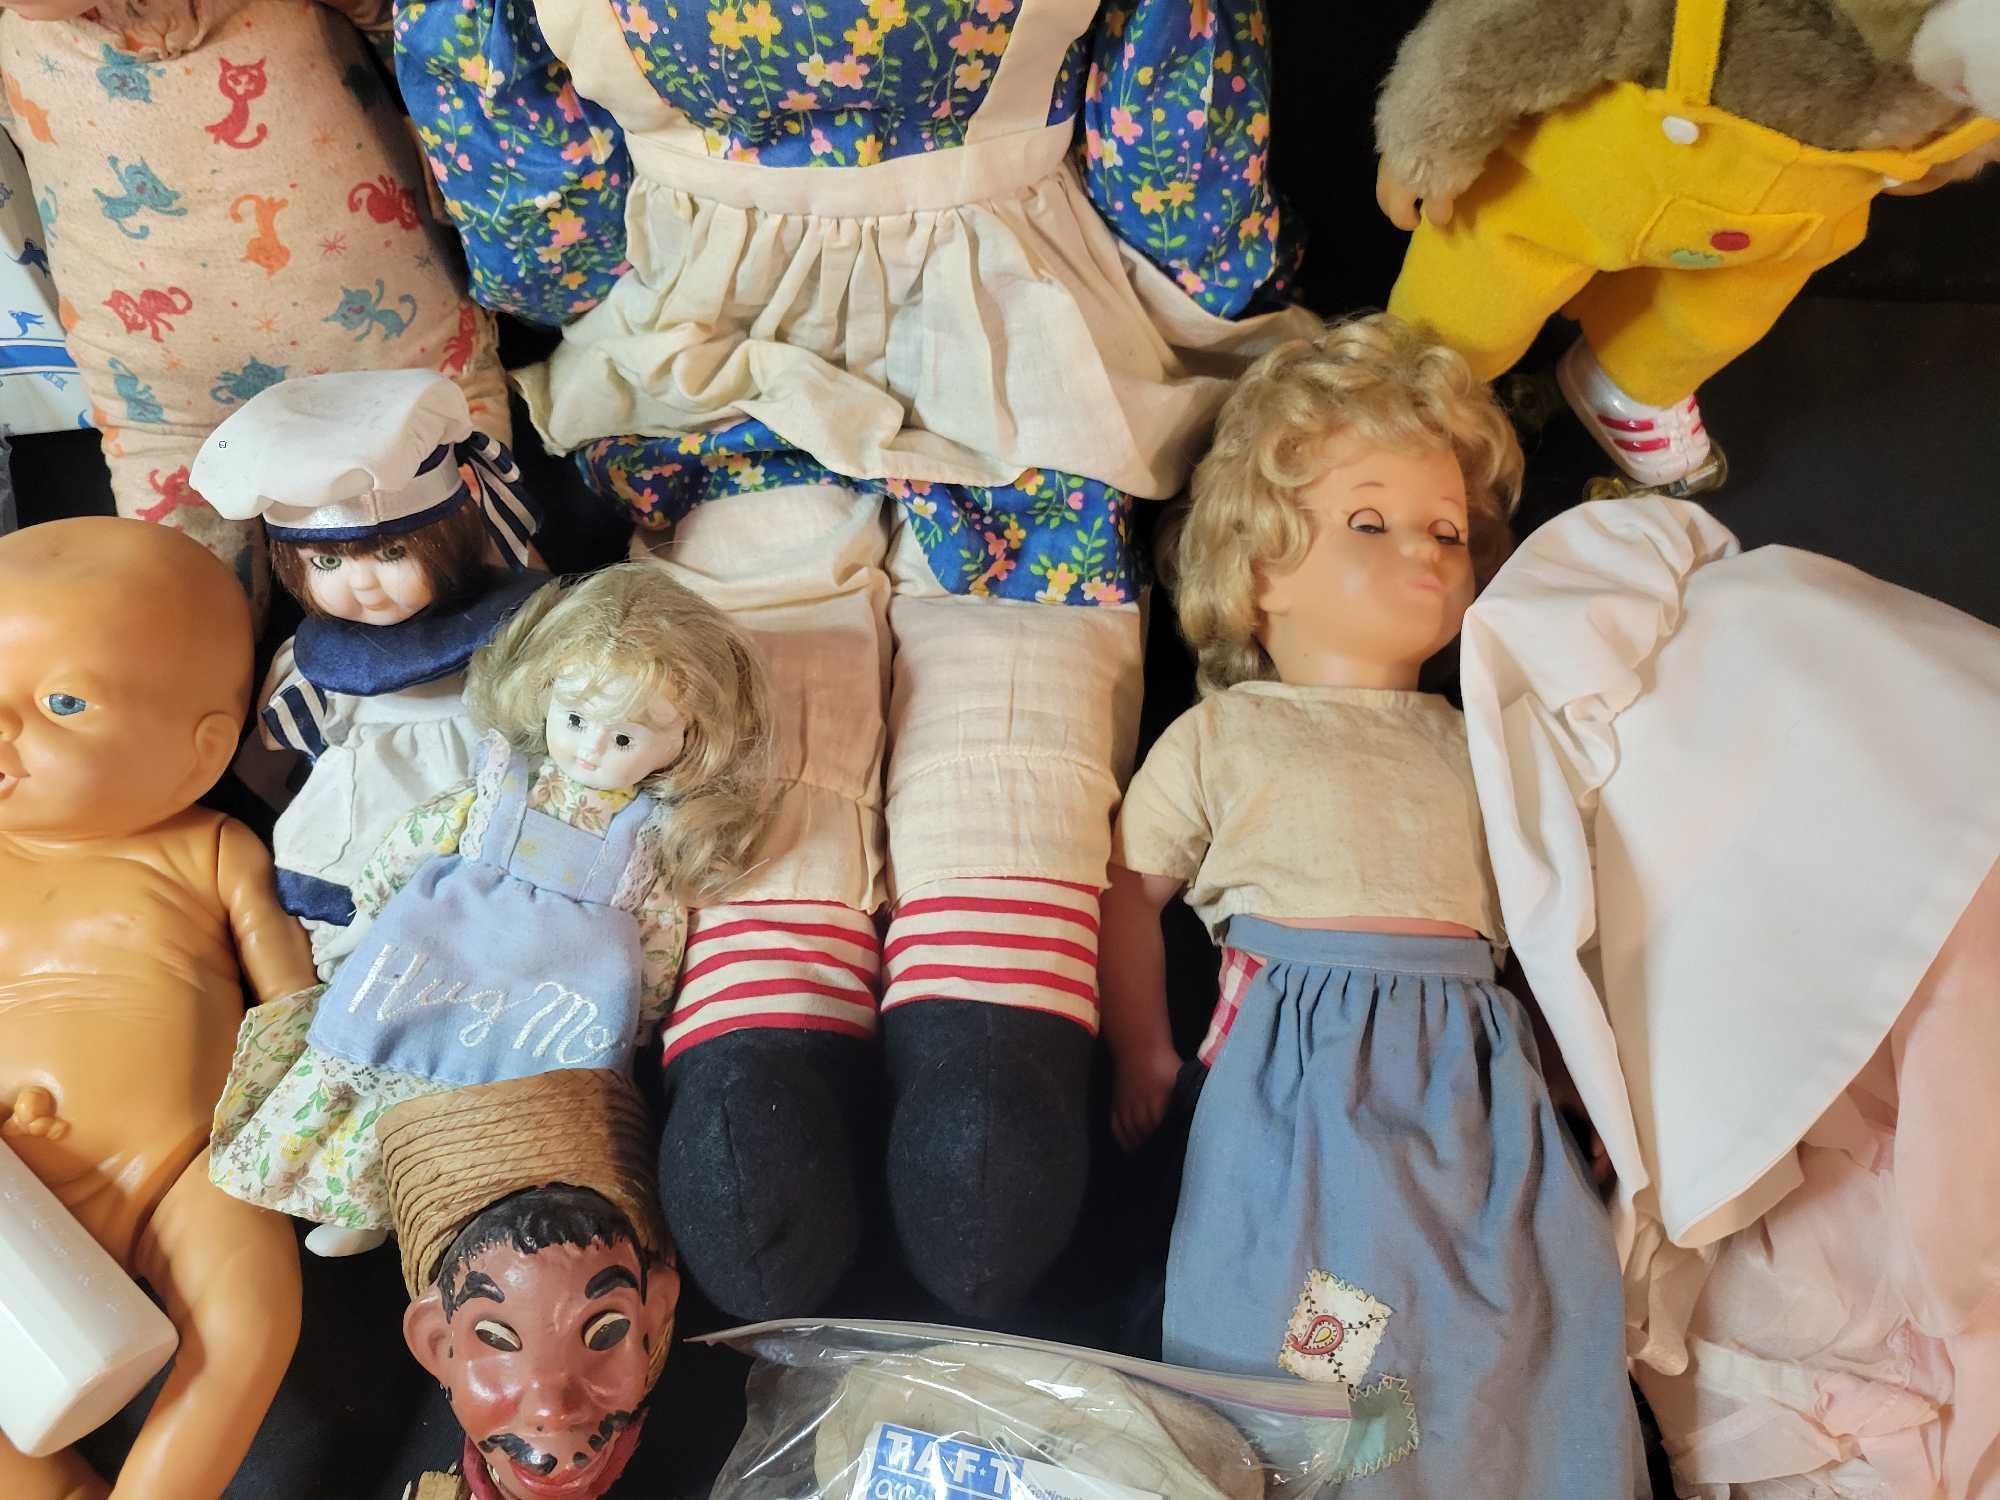 Assorted vintage baby dolls, puppets, kewpie dolls, clothing